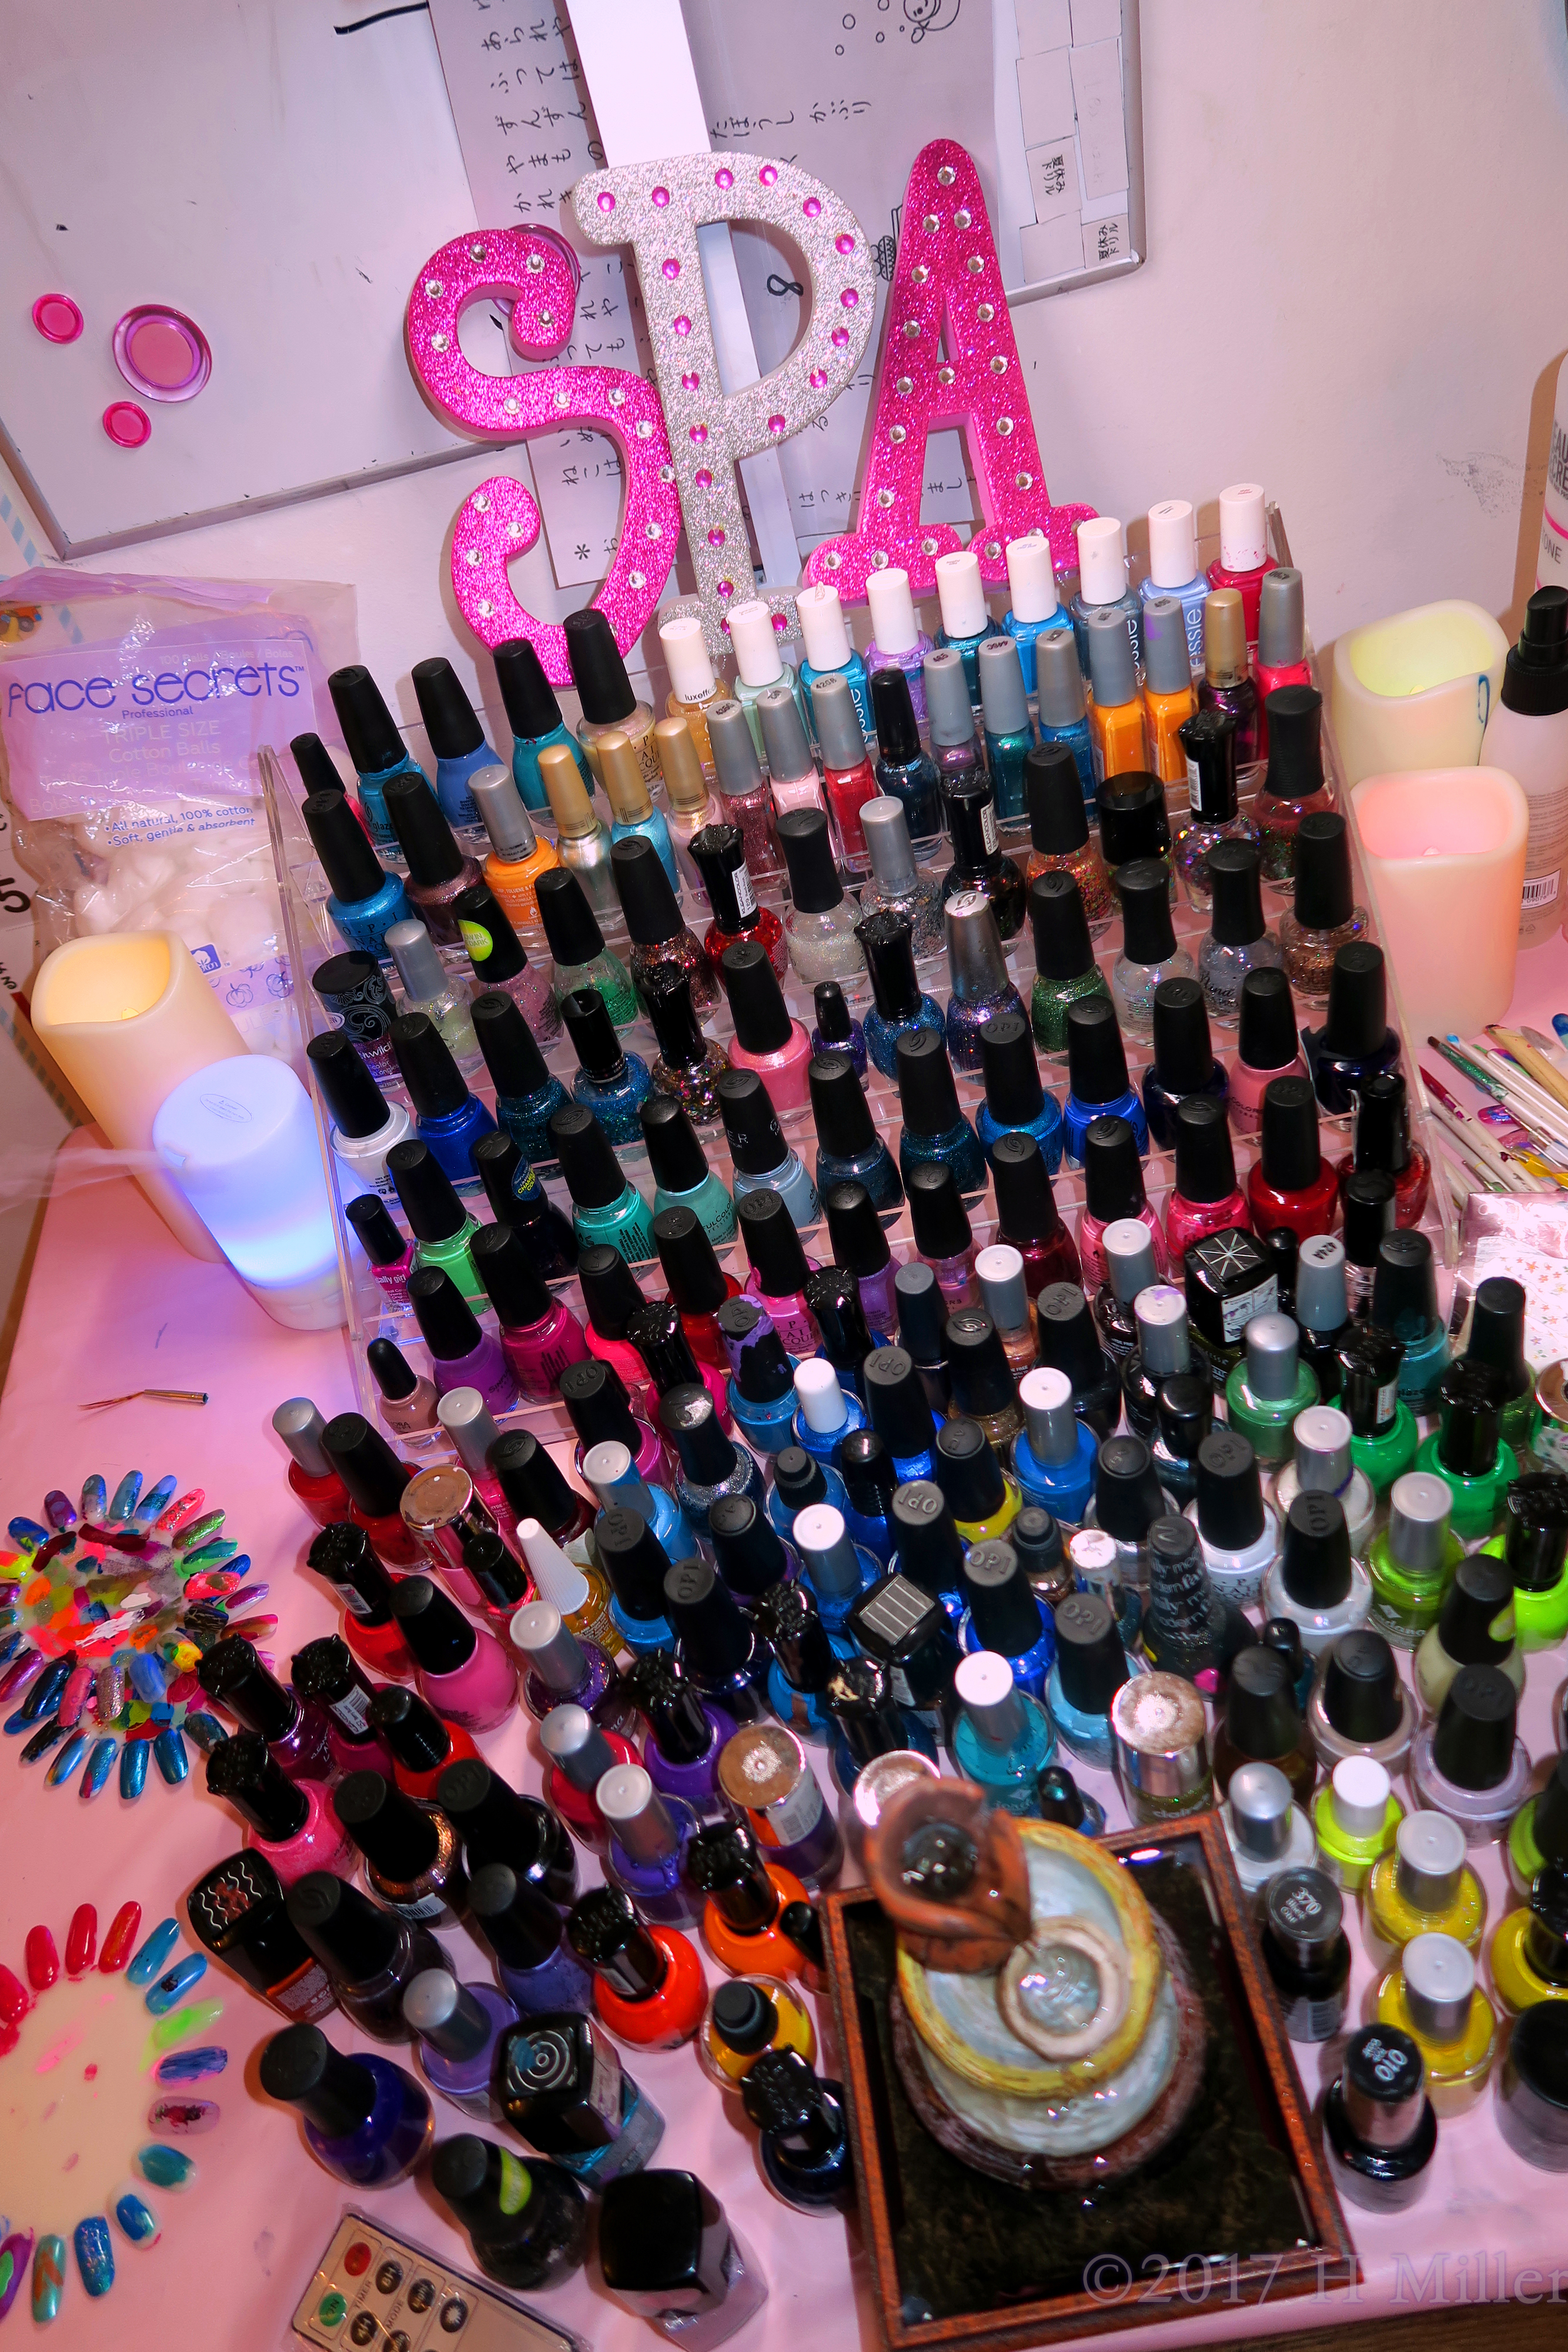 All Varieties And Colors Of Nail Polishes For Perfect Kids Manicures. 